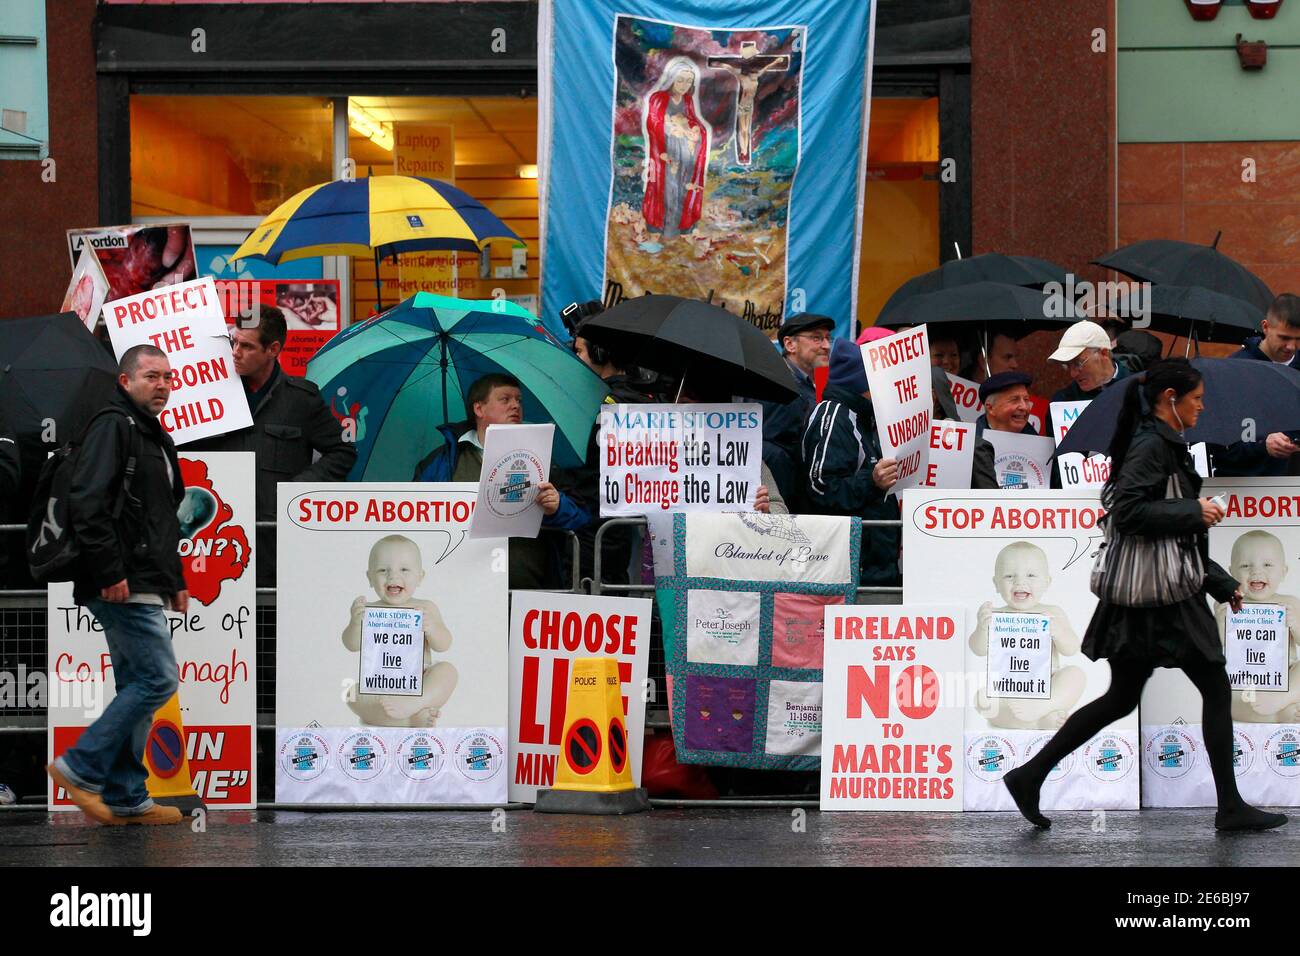 Pro-life campaigners protest outside the Marie Stopes clinic in Belfast October 18, 2012. The first private clinic offering abortions opened in Northern Ireland on Thursday, making access to abortion much easier for women in both Northern Ireland and the Republic of Ireland.    REUTERS/Cathal McNaughton   (NORTHERN IRELAND - Tags: HEALTH SOCIETY) Stock Photo